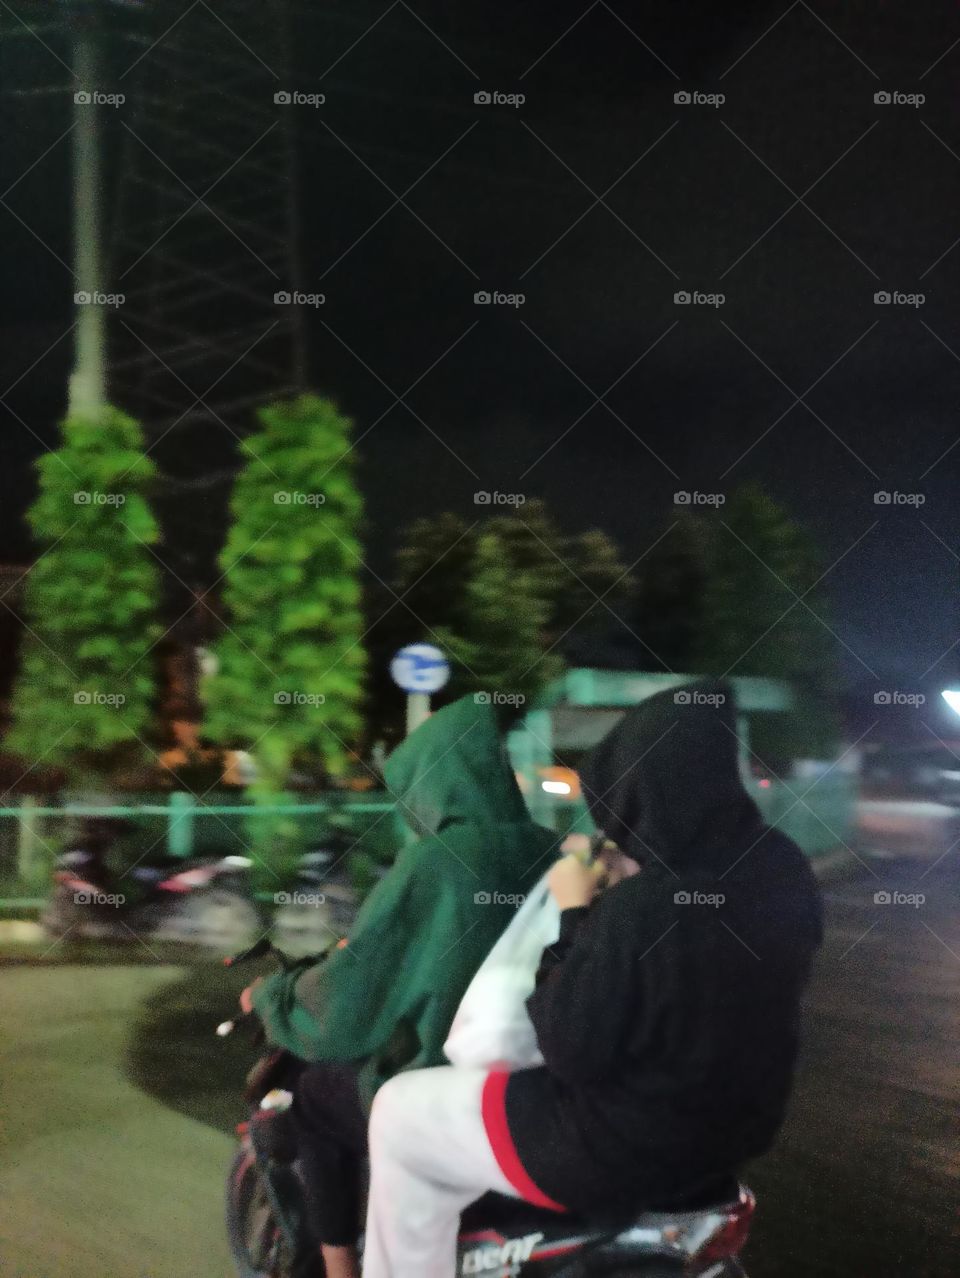 Riding Motor Together With Friend, At Night